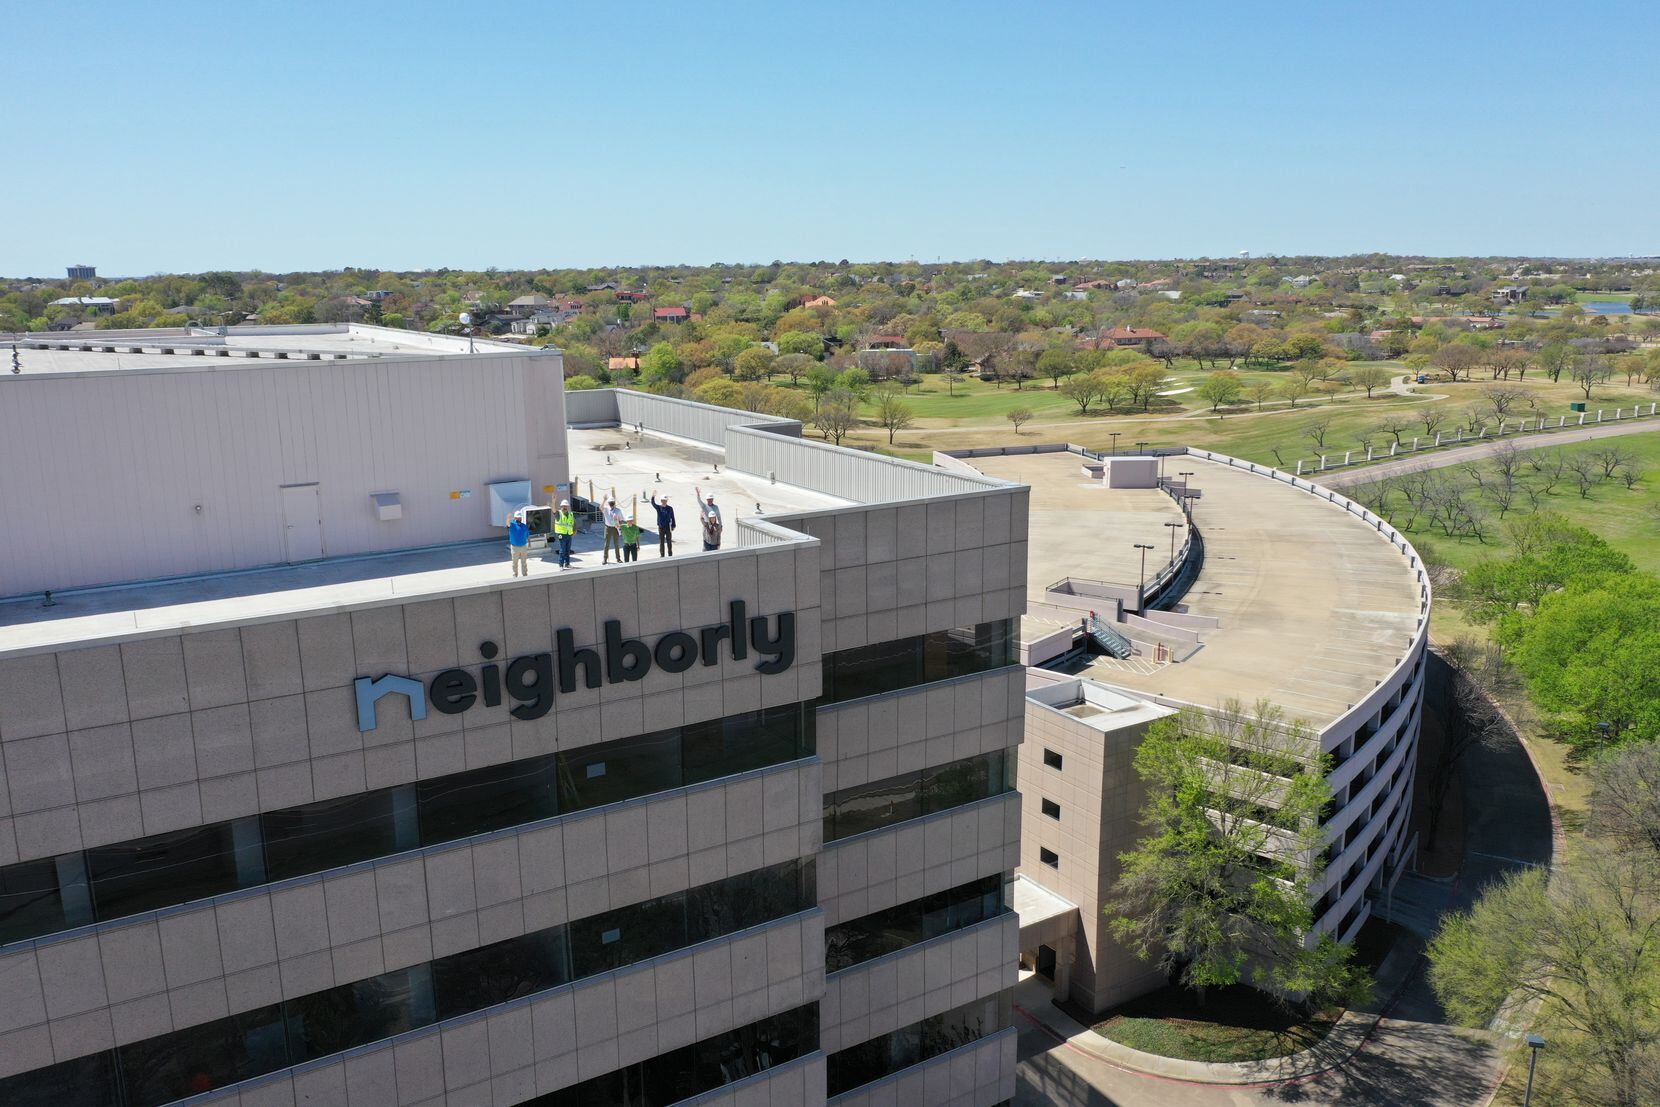 Waco-based Neighborly is opening a second headquarters in Las Colinas.